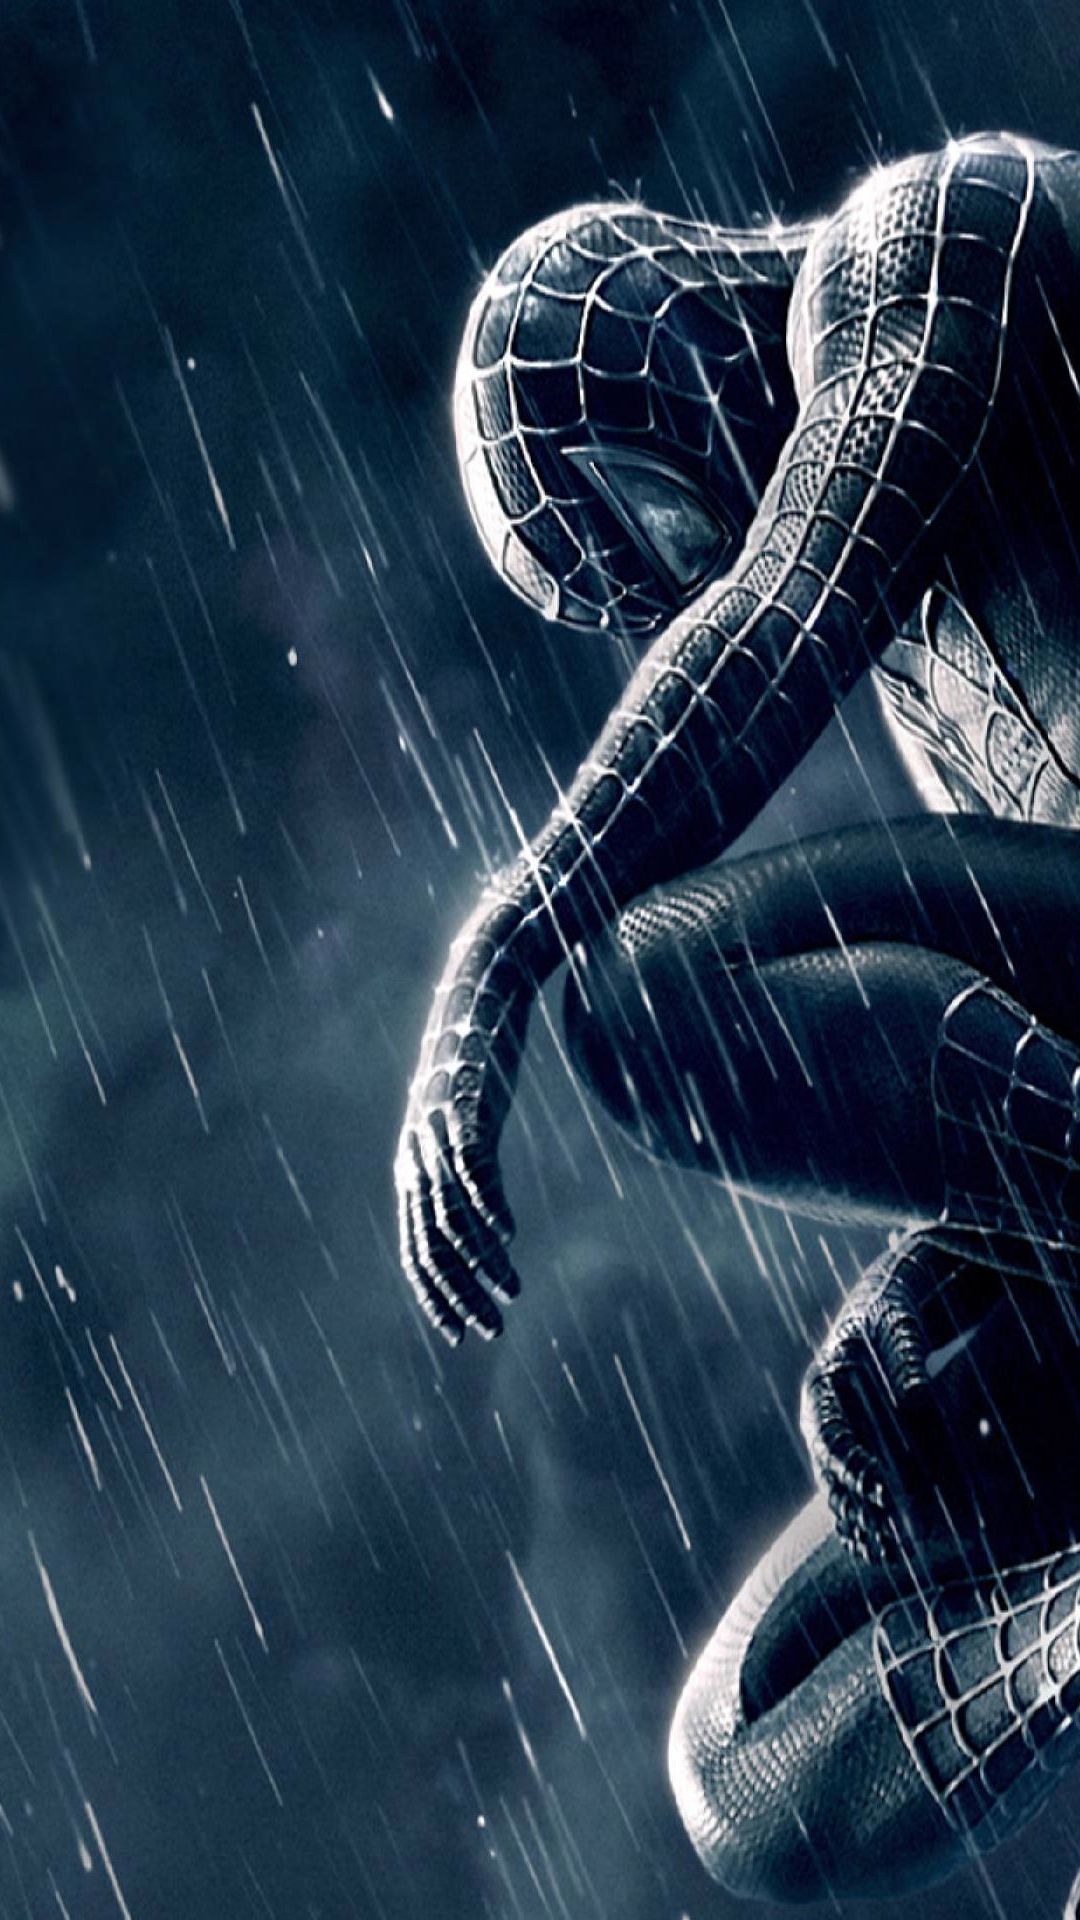 Spiderman 3 Rain | Android Wallpapers